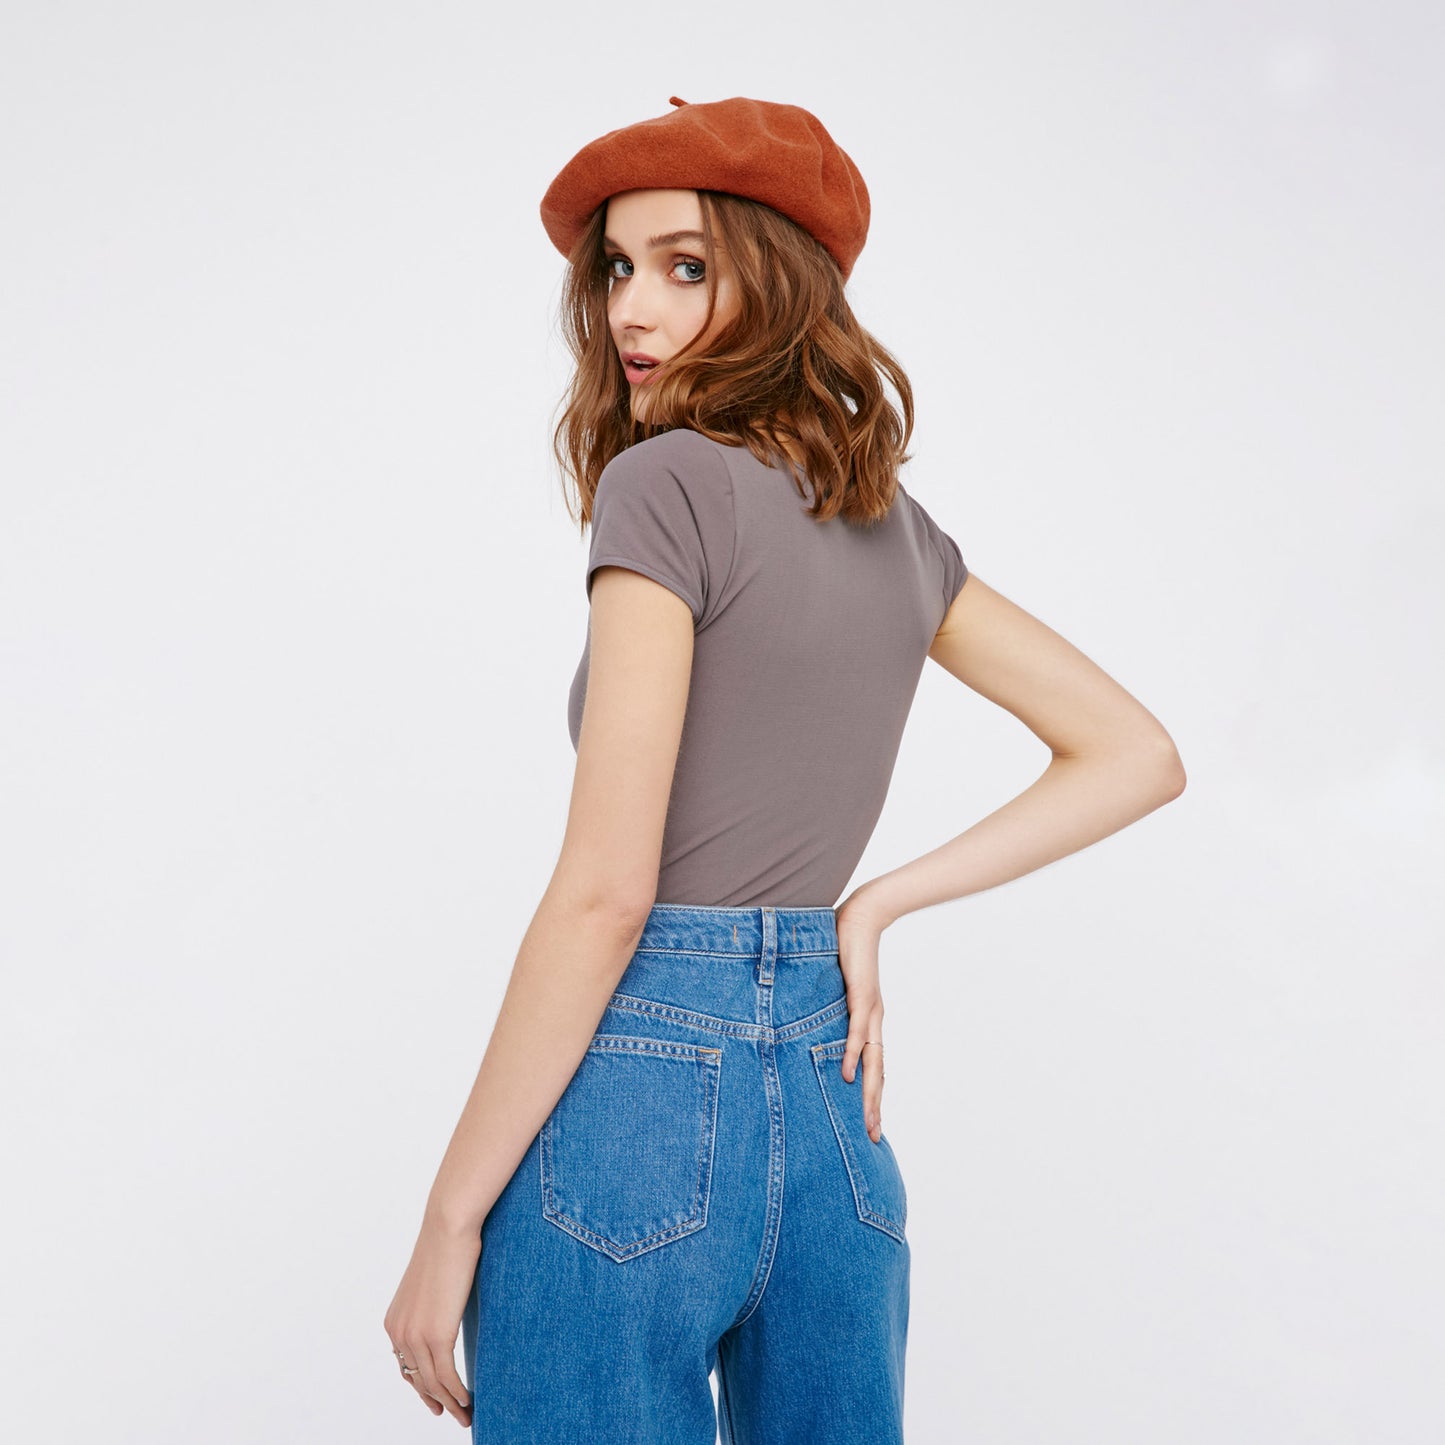 Free People Cap Sleeve Crop Top. A solid design lends versatile appeal to this cropped top by Free People. This basic crop top features a pullover style, crew neck, and short cap sleeves. Wear this with almost any bottom and sandals for a chic look.